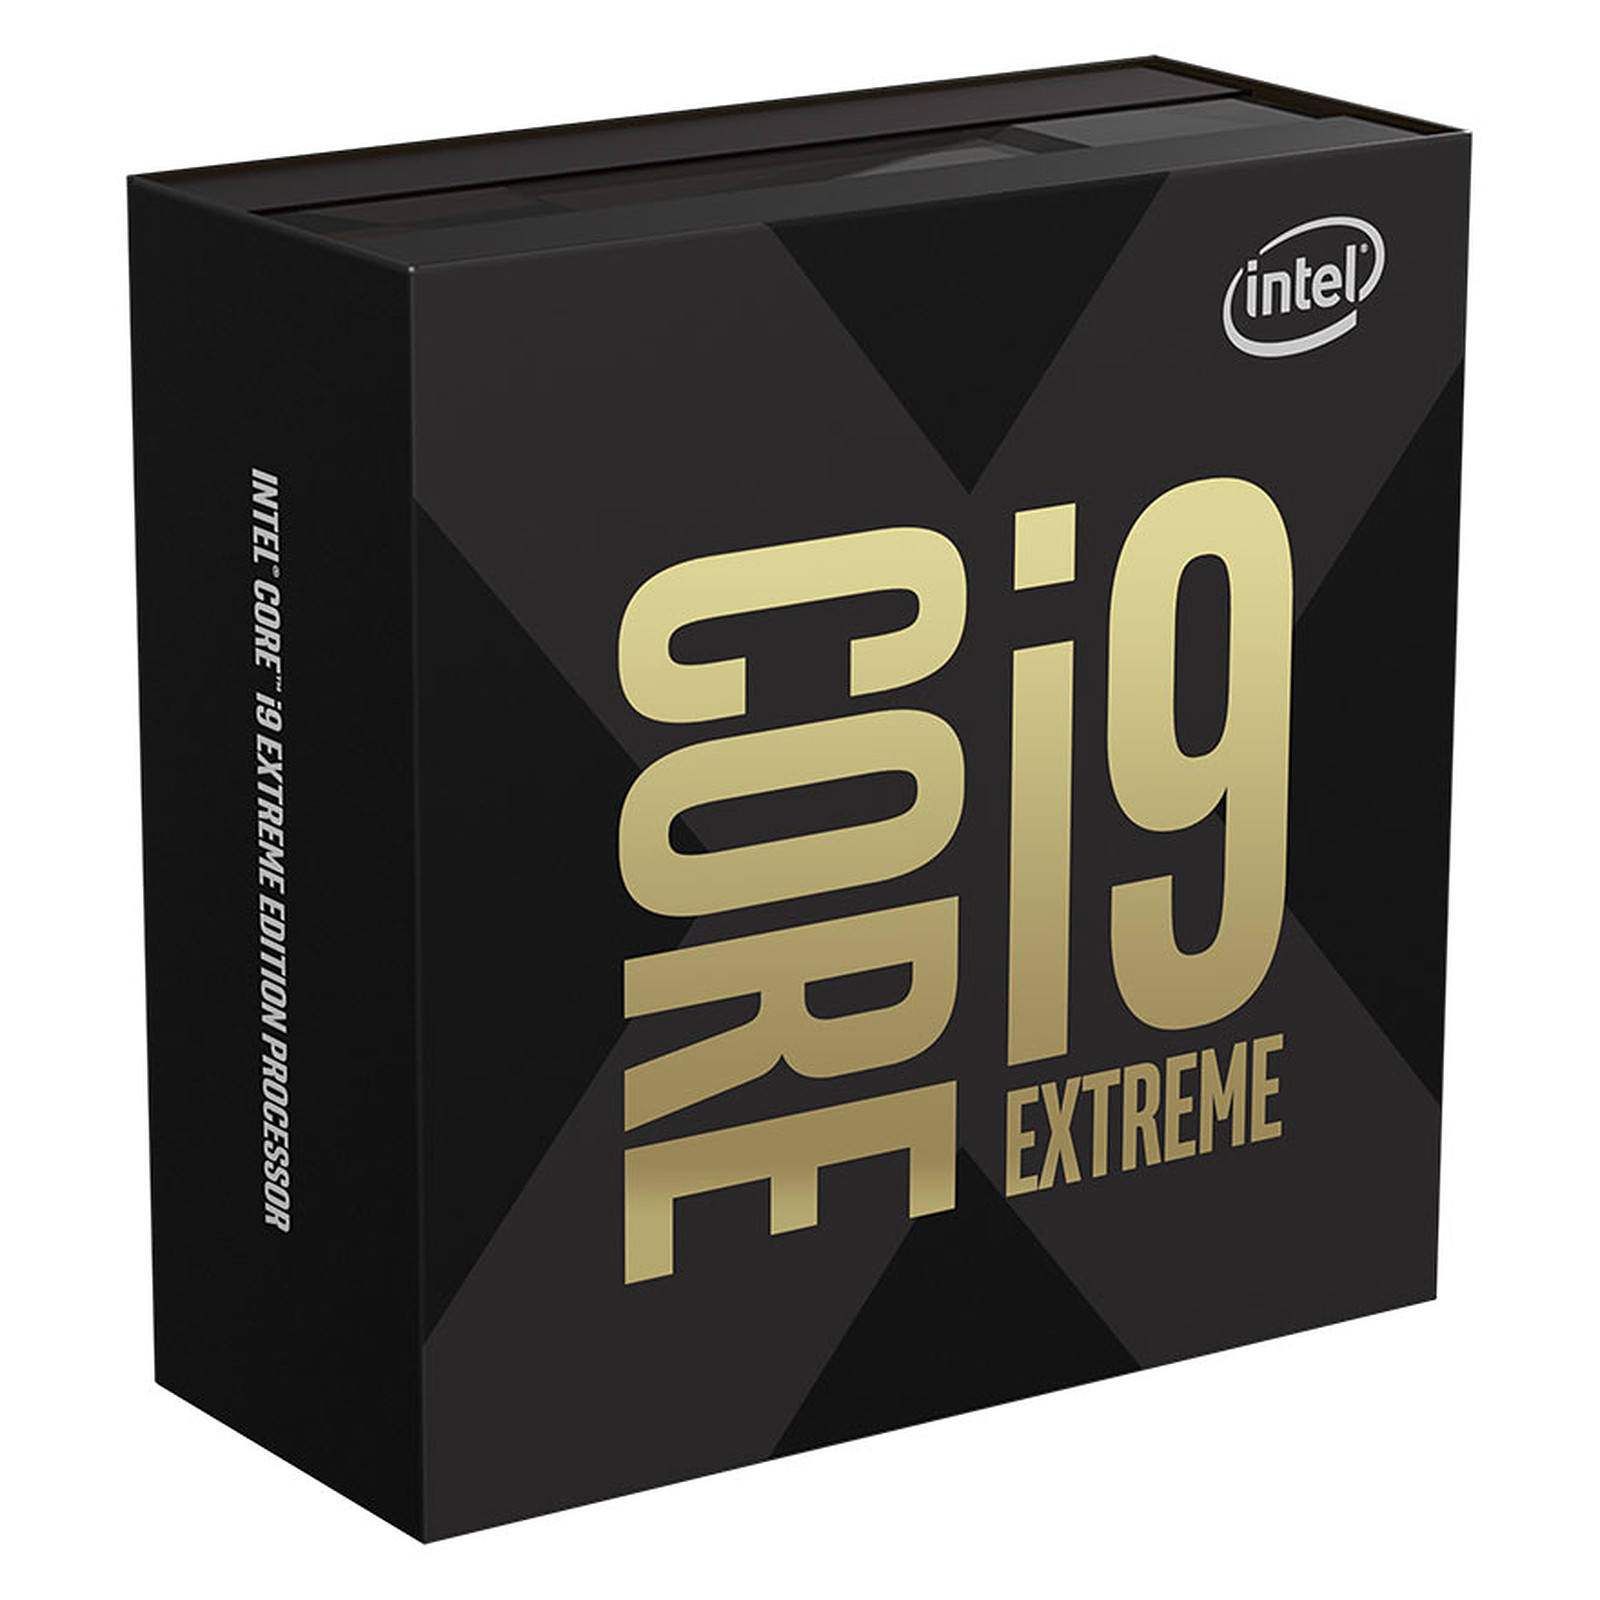 Intel Core i9-10980XE Extreme Edition (3.0 GHz / 4.6 GHz) · Occasion - Processeur Intel - Occasion